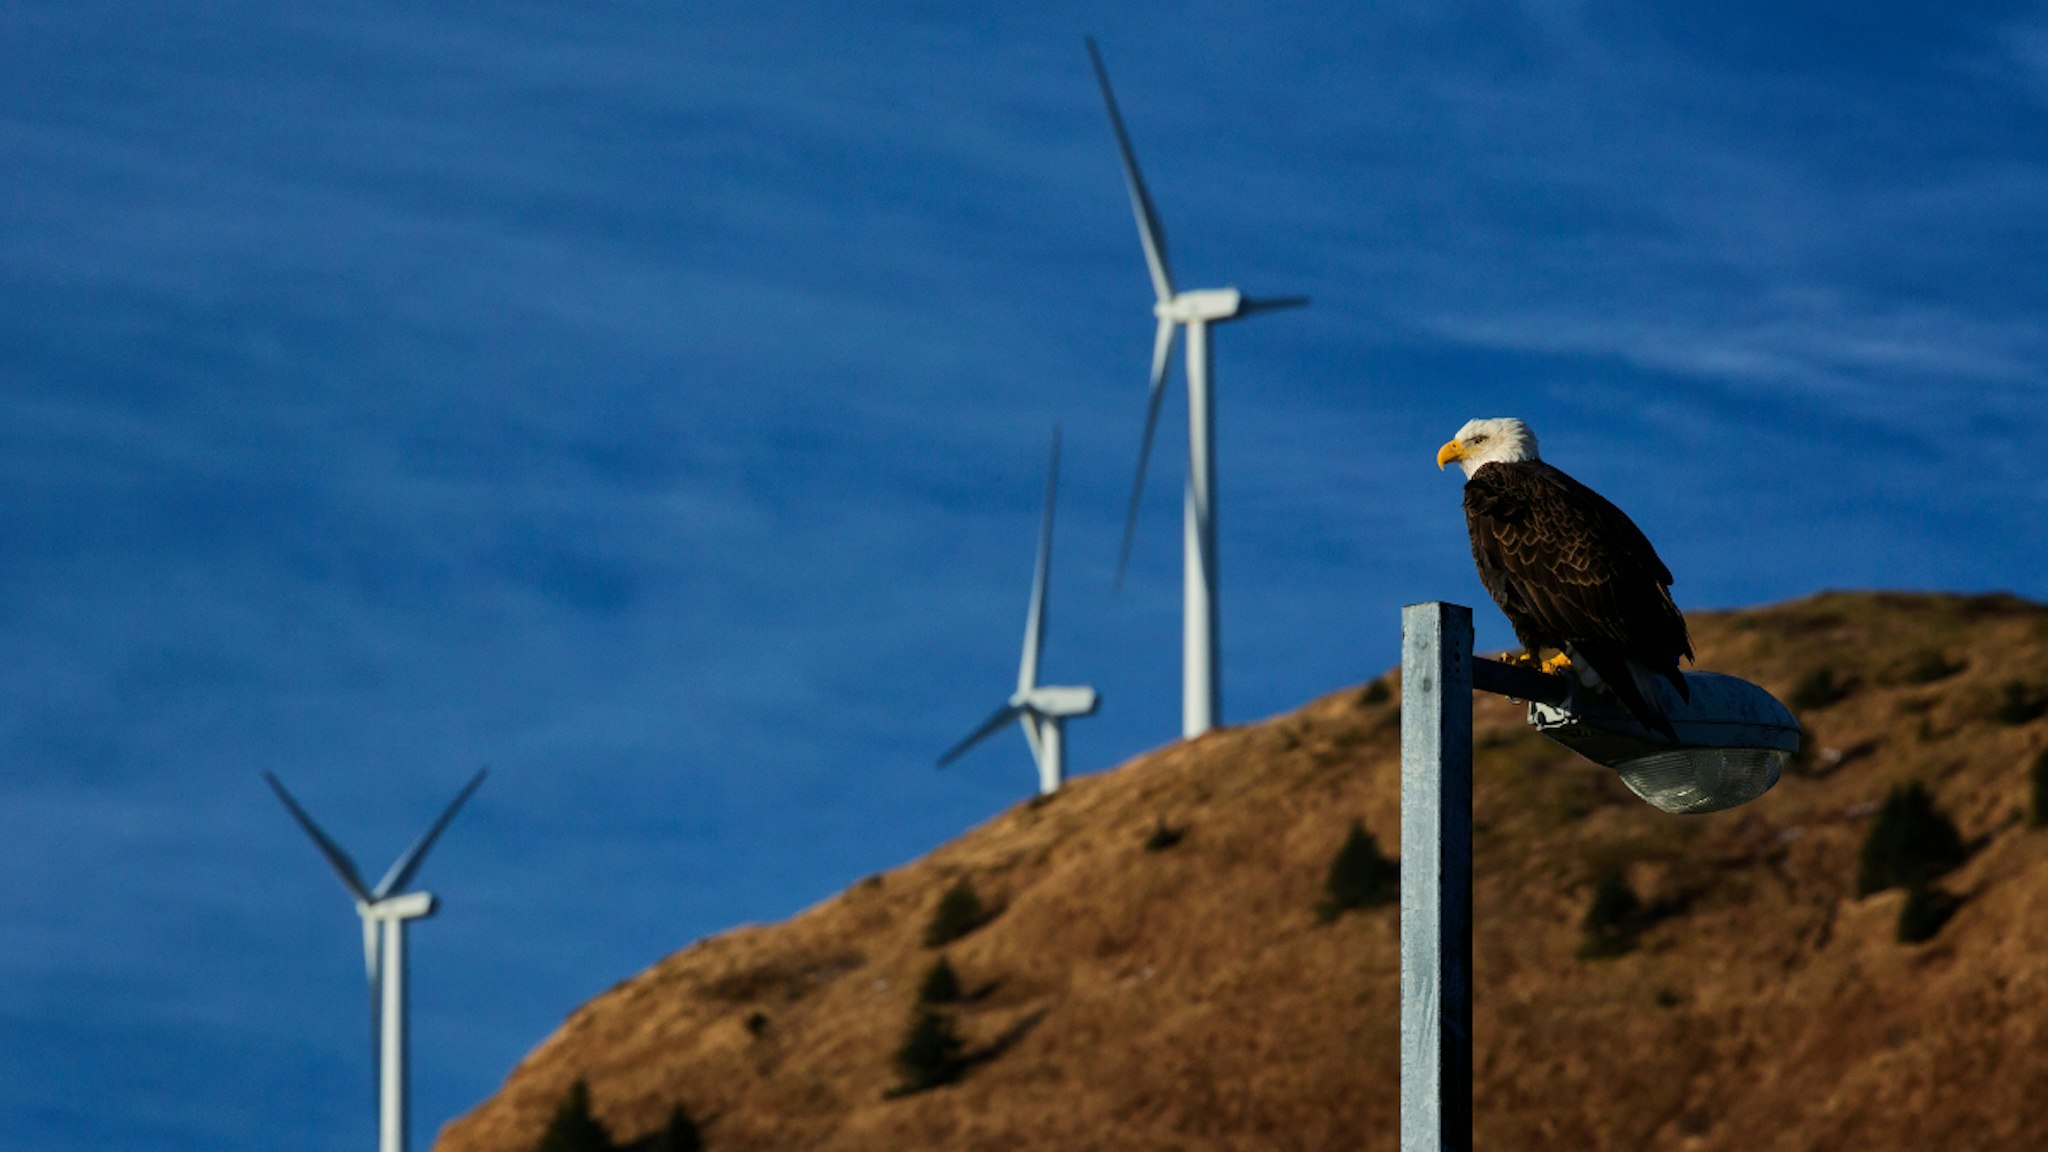 Bald eagle perched on lamp post in downtown Kodiak with wind turbines in background, Southwest Alaska - stock photo